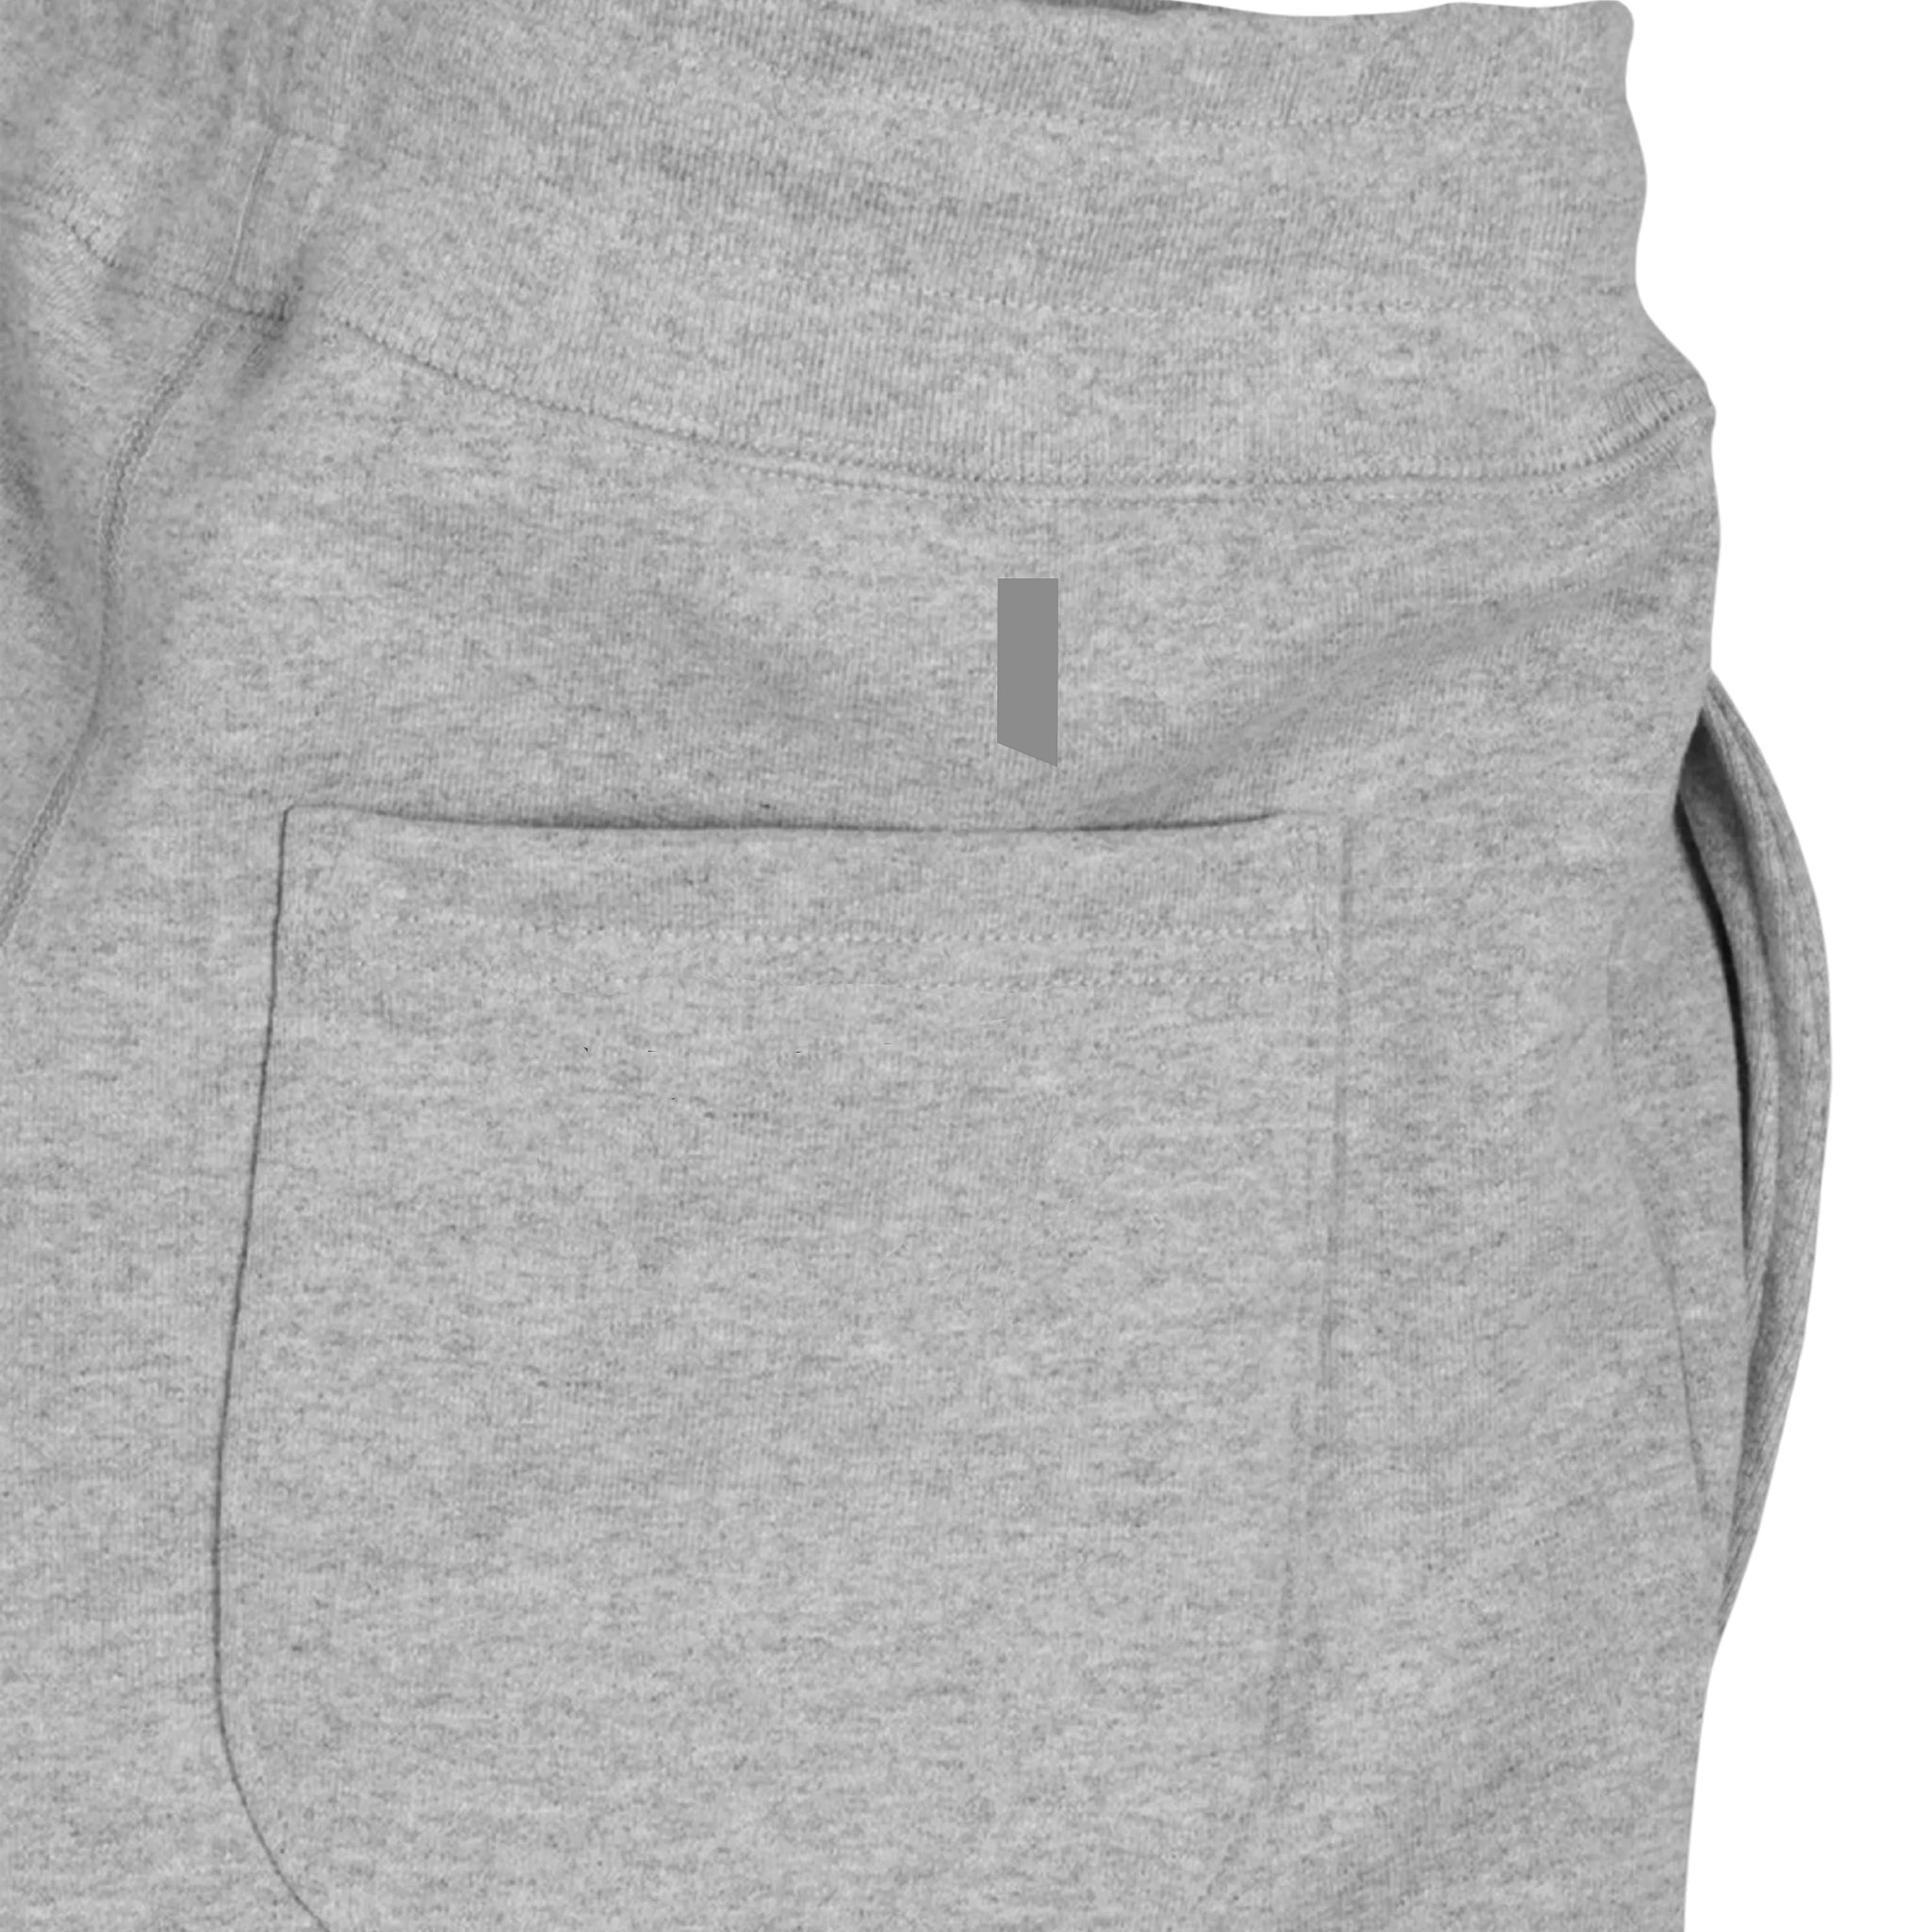 pocket detail view of grey heavyweight knit joggers against white background